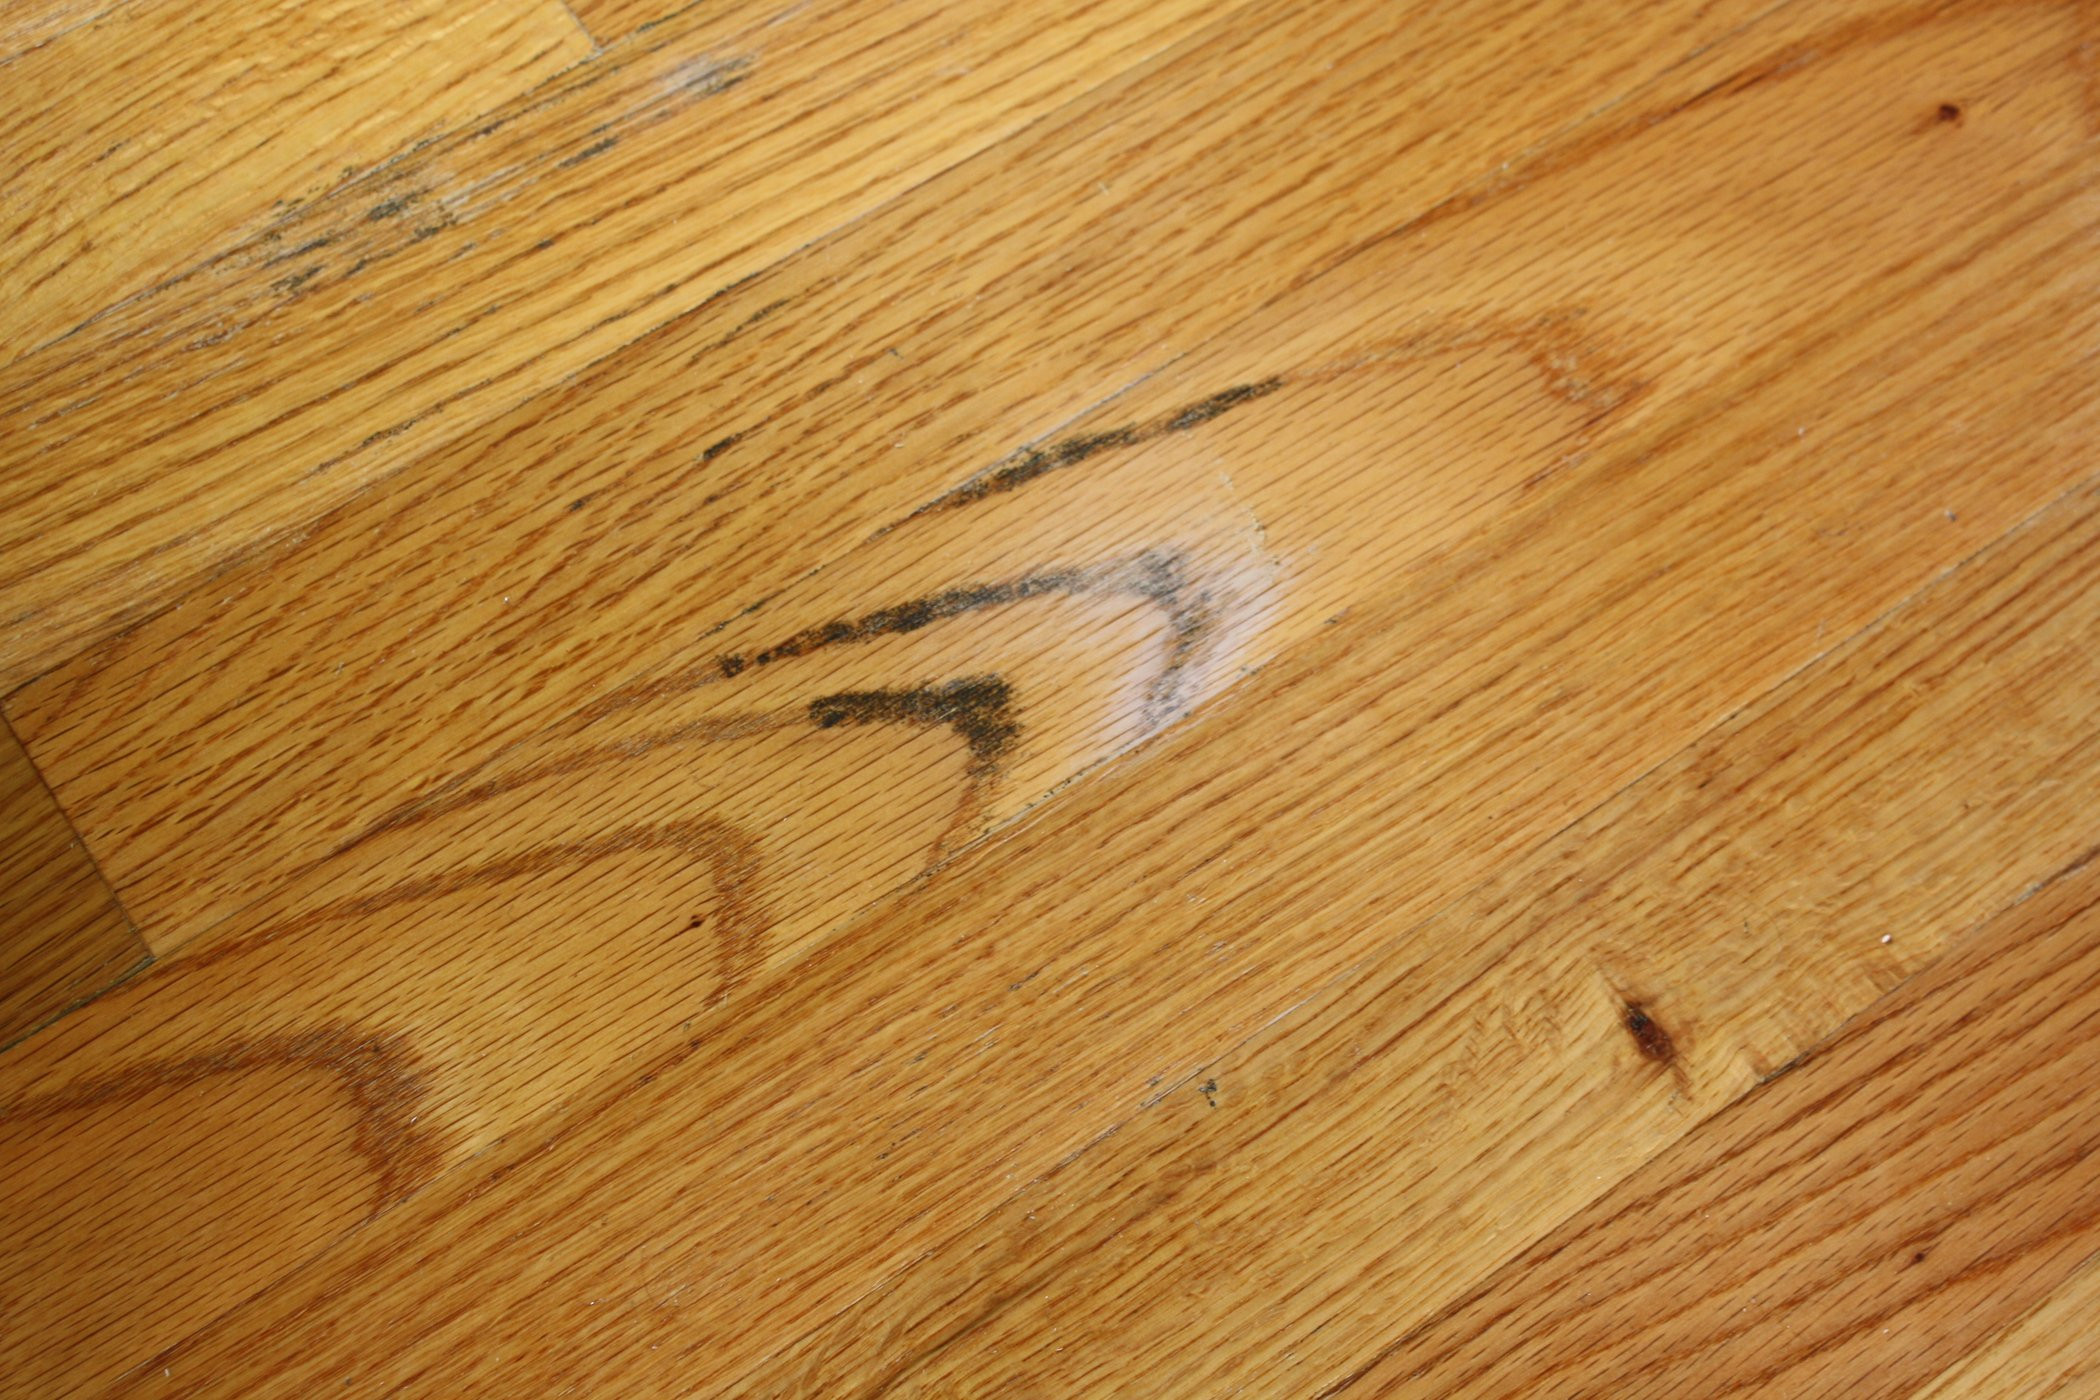 average price to refinish hardwood floors of how to clean mold from a wood floor 4 steps regarding fylcmqyg7dyp6ds